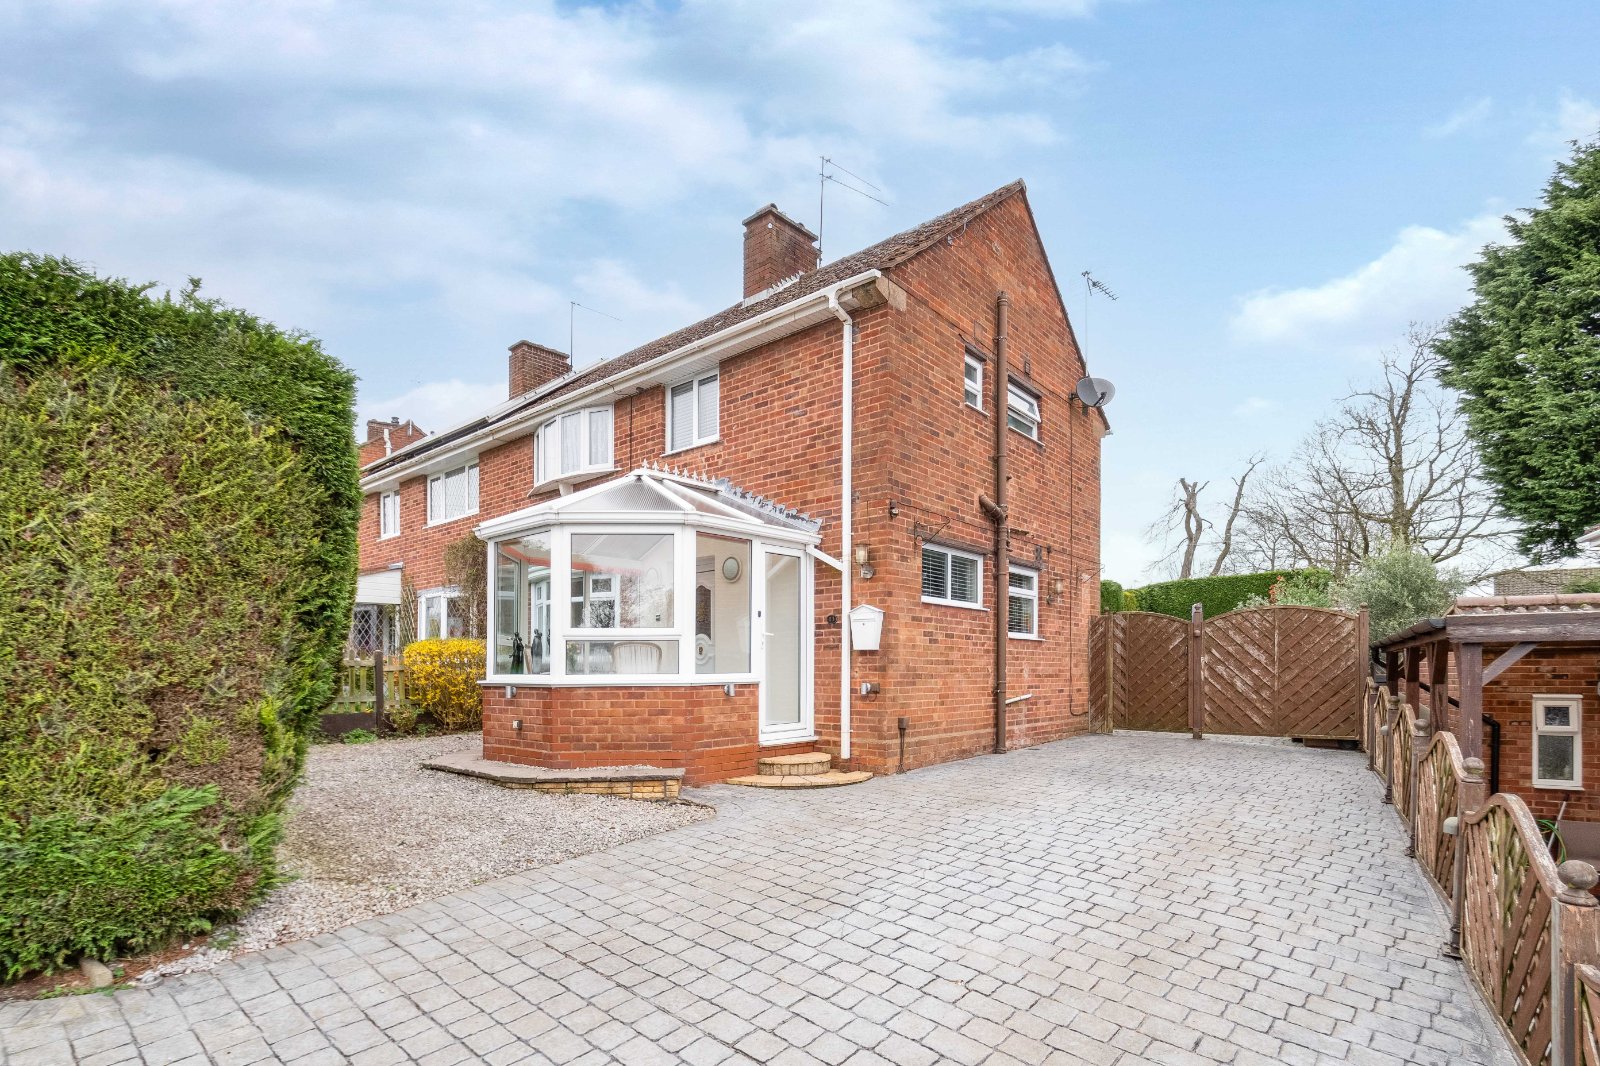 3 bed house for sale in The Park, Hewell Grange - Property Image 1